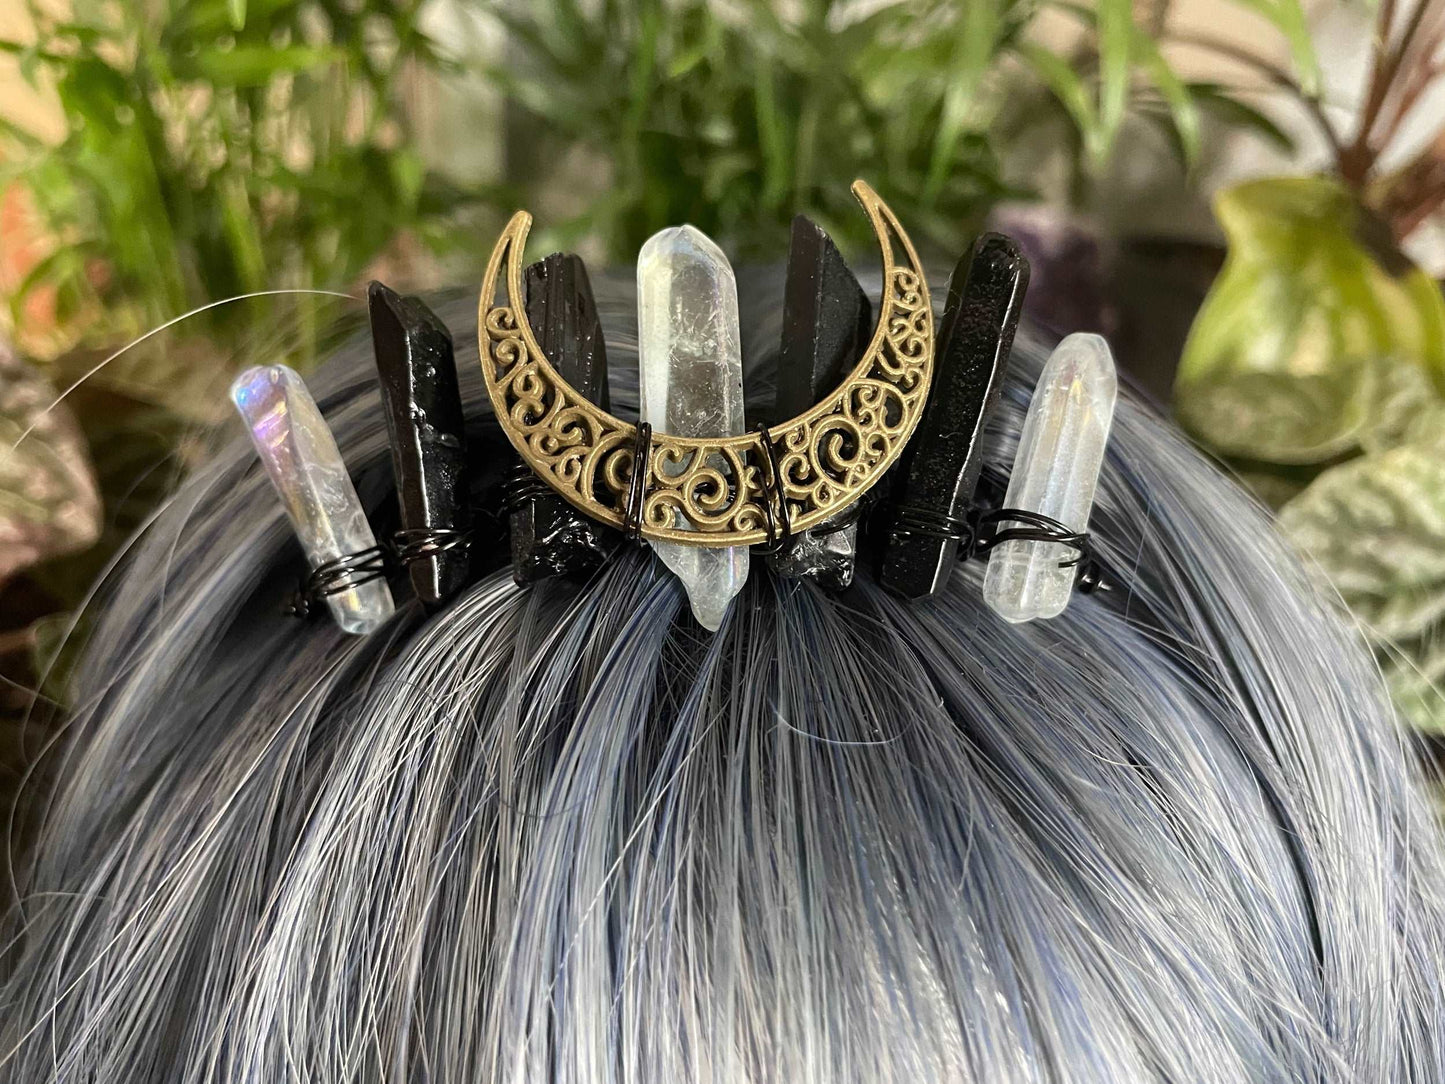 Pictured is a hair comb with clear quartz and obsidian crystal points and a gold coloured crescent moon in the middle.